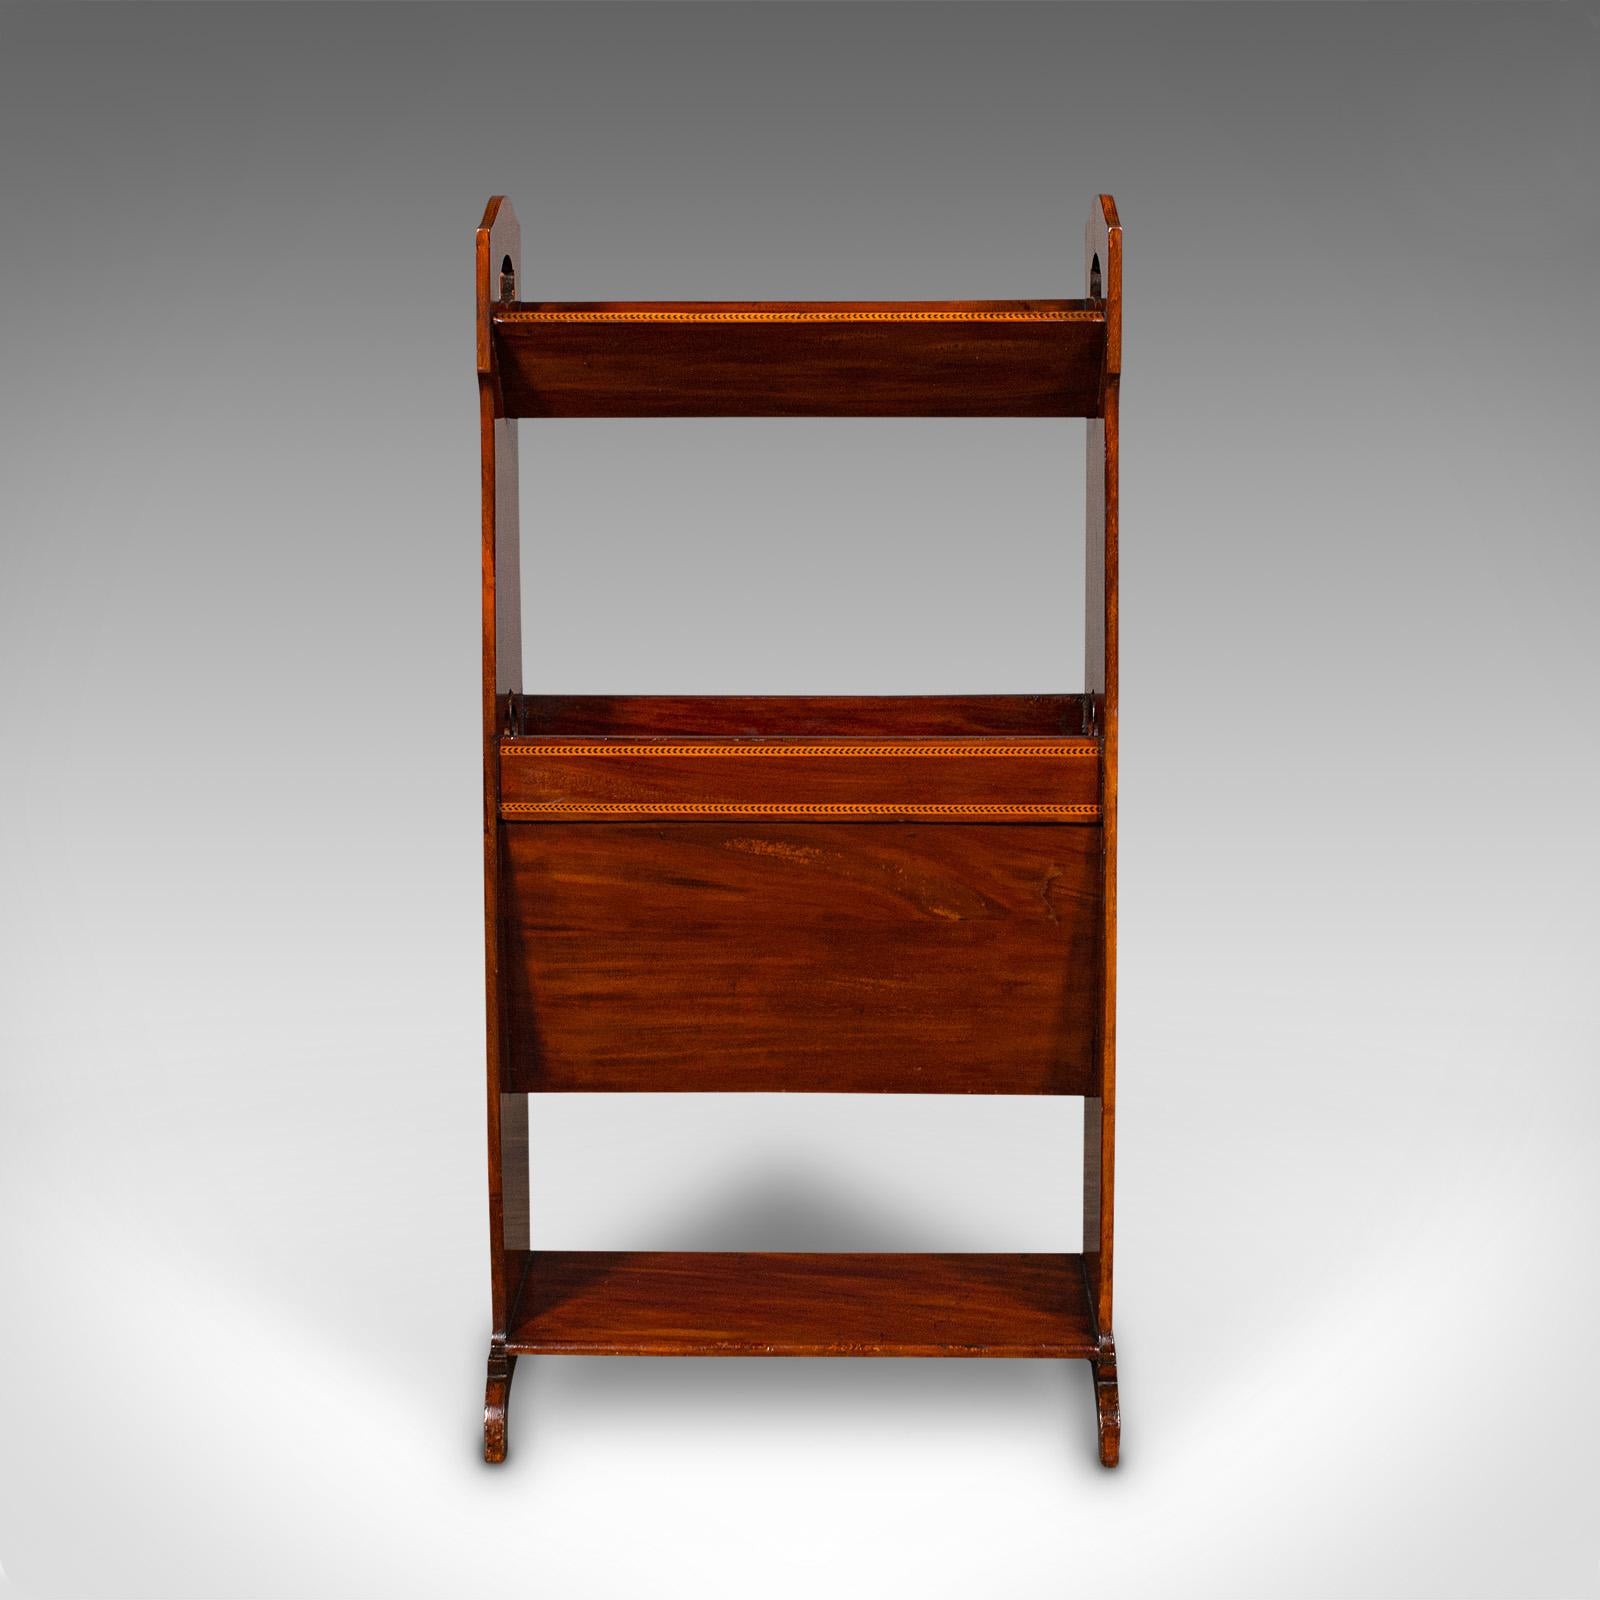 This is an antique Arts & Crafts book stand. An English, mahogany magazine rack or Canterbury, dating to the Edwardian period, circa 1910.

Of delightful form and attractive presentation for the avid reader
Displays a desirable aged patina and in